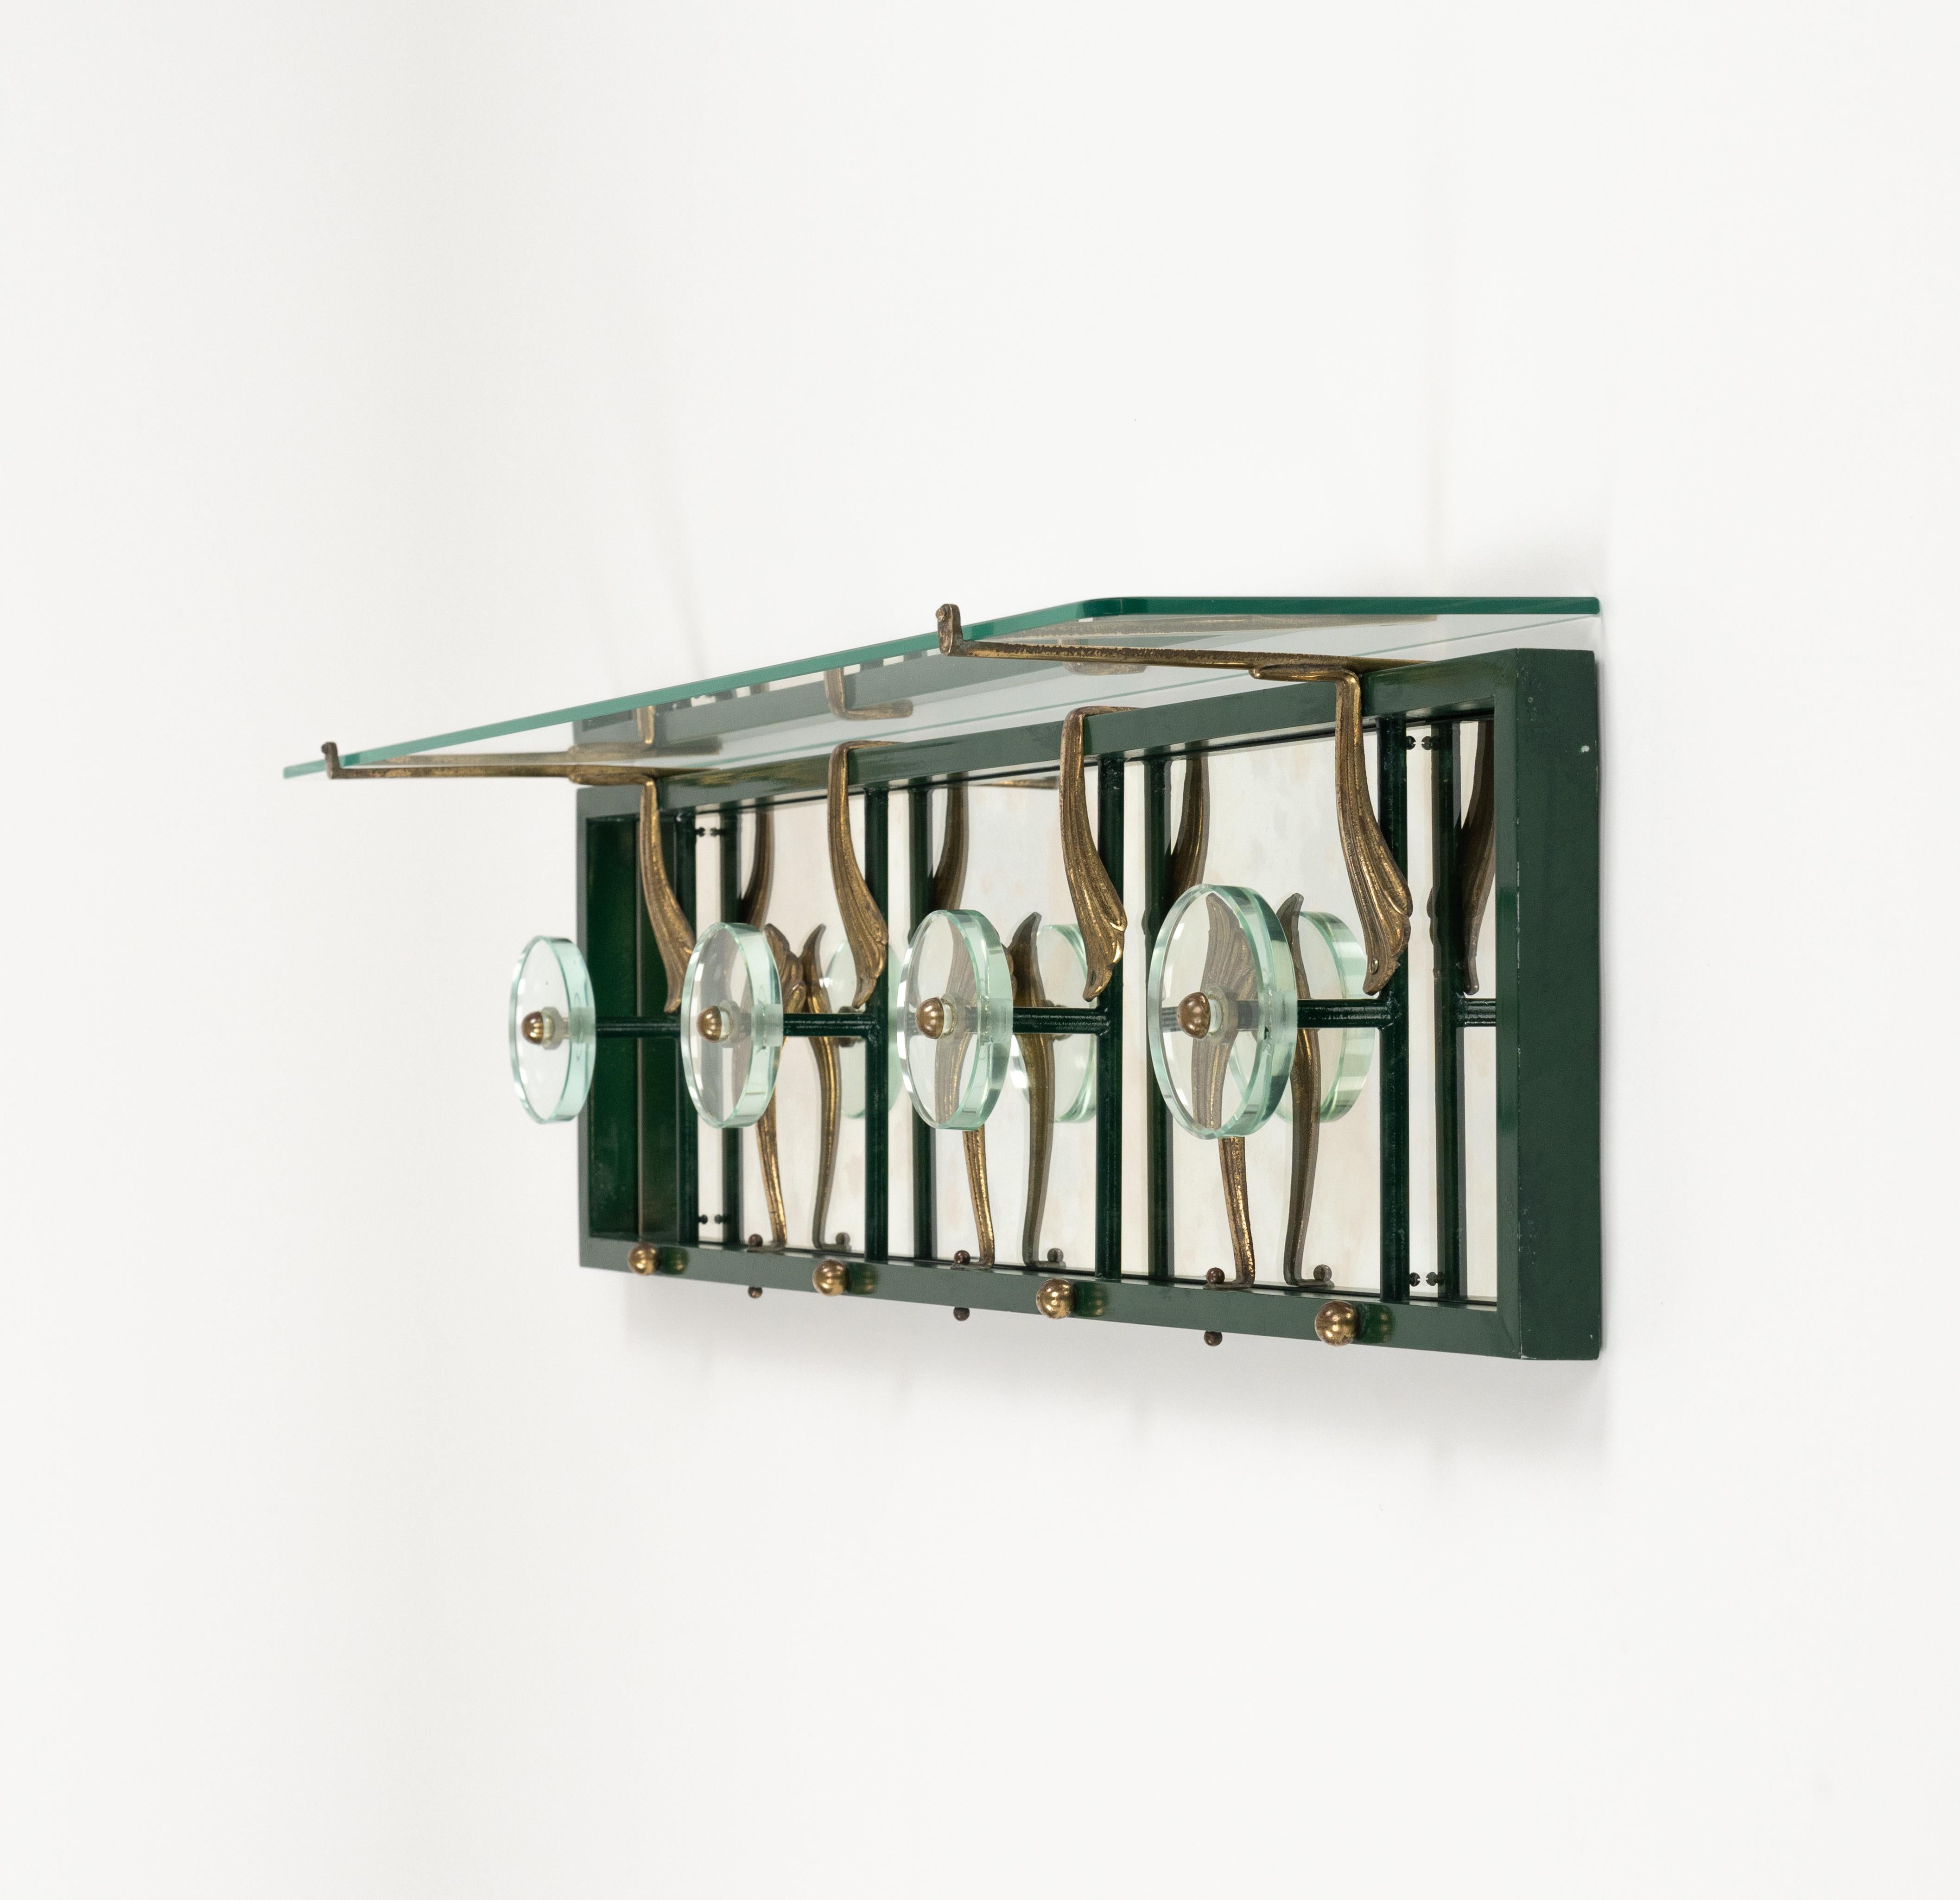 Midcentury Coat Rack Shelf in Mirror, Brass & Glass by Cristal Art, Italy, 1950s For Sale 4